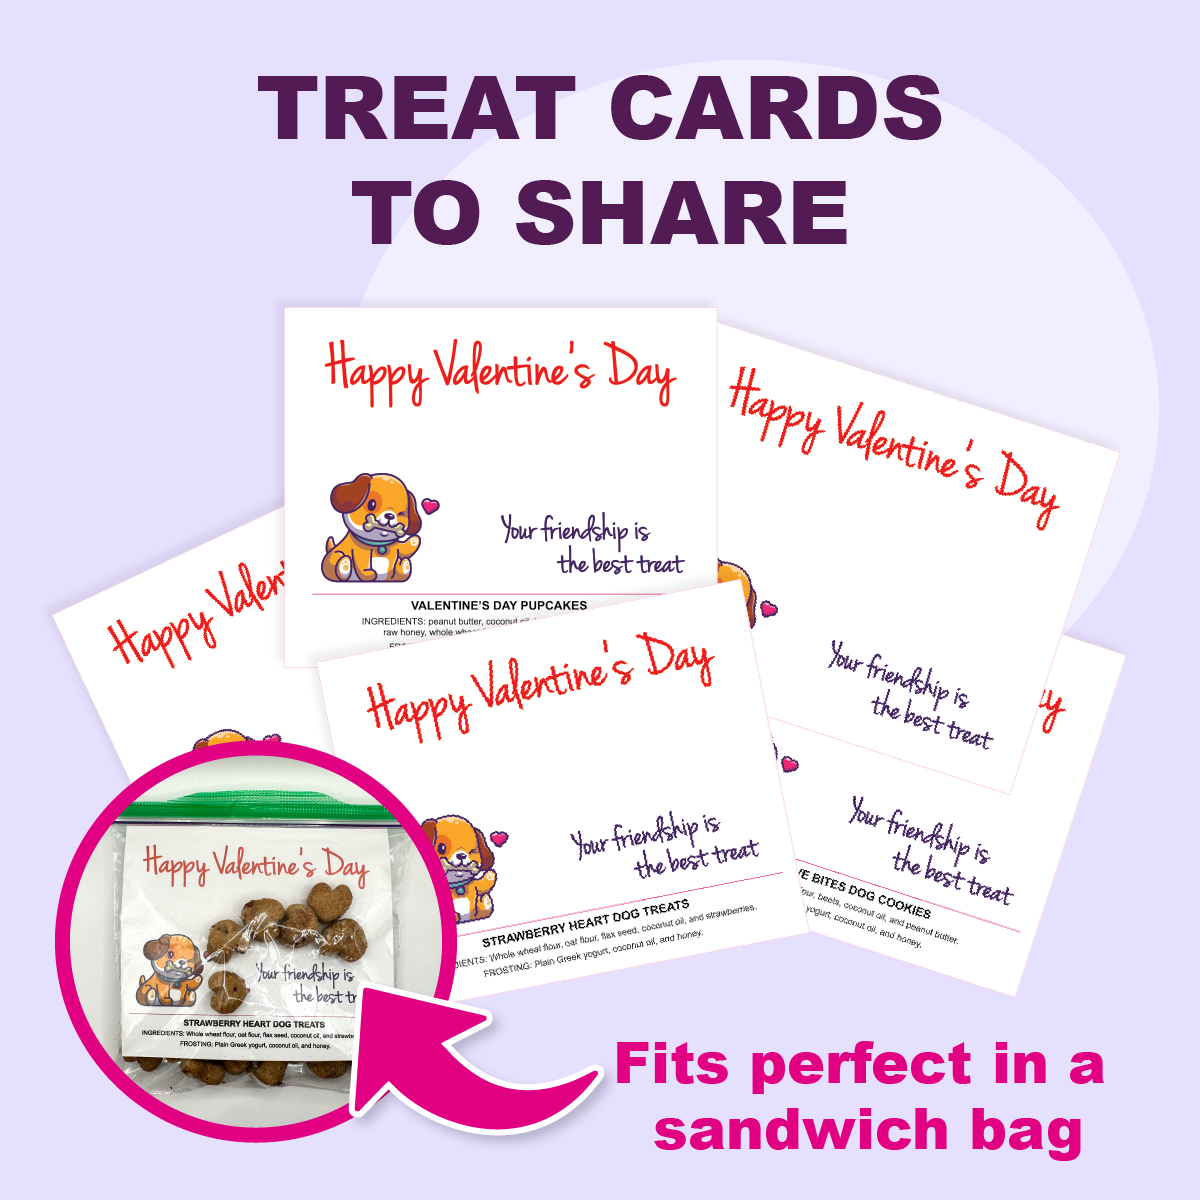 mock up of treat cards shown inside a sandwich baggy.